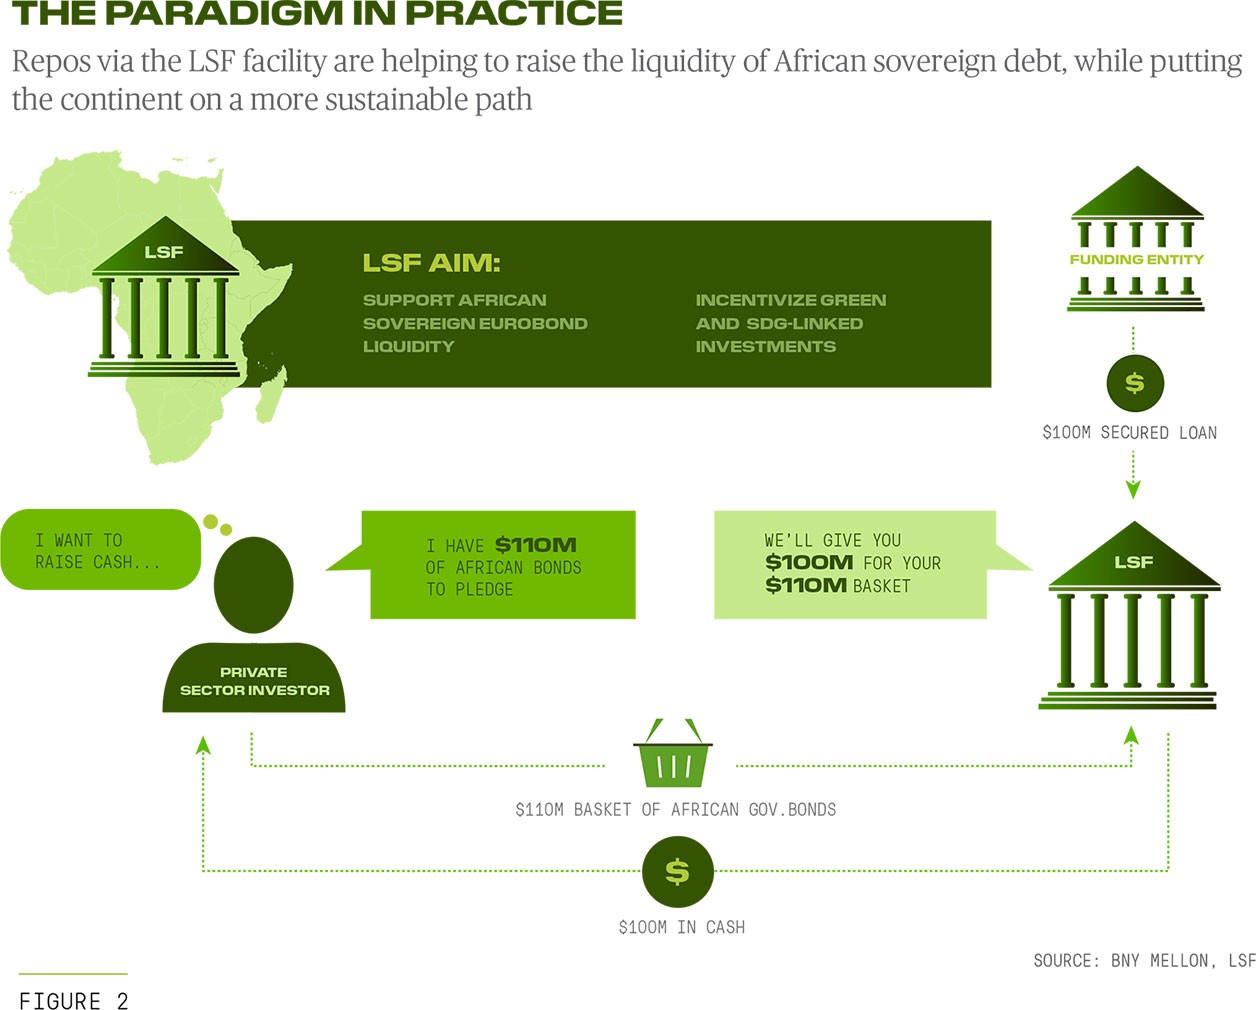 Repos via the LSF facility are helping to raise the liquidity of African sovereign debt